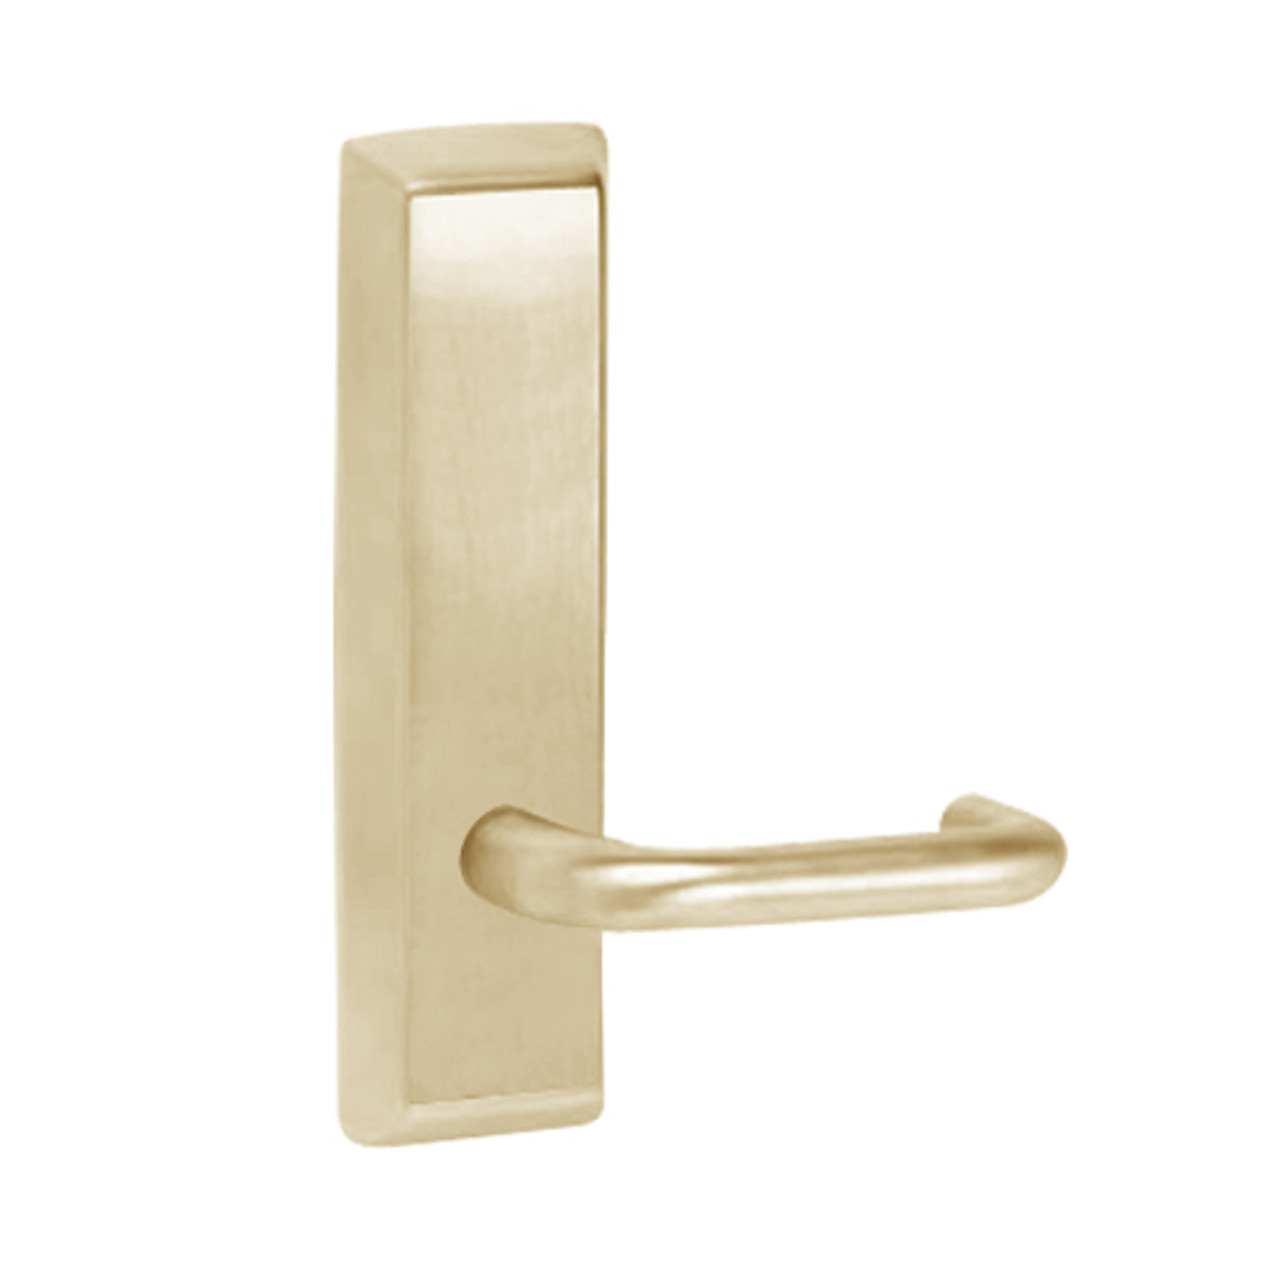 L955-606-LHR Corbin ED5000 Series Exit Device Trim with Classroom Lustra Lever in Satin Brass Finish